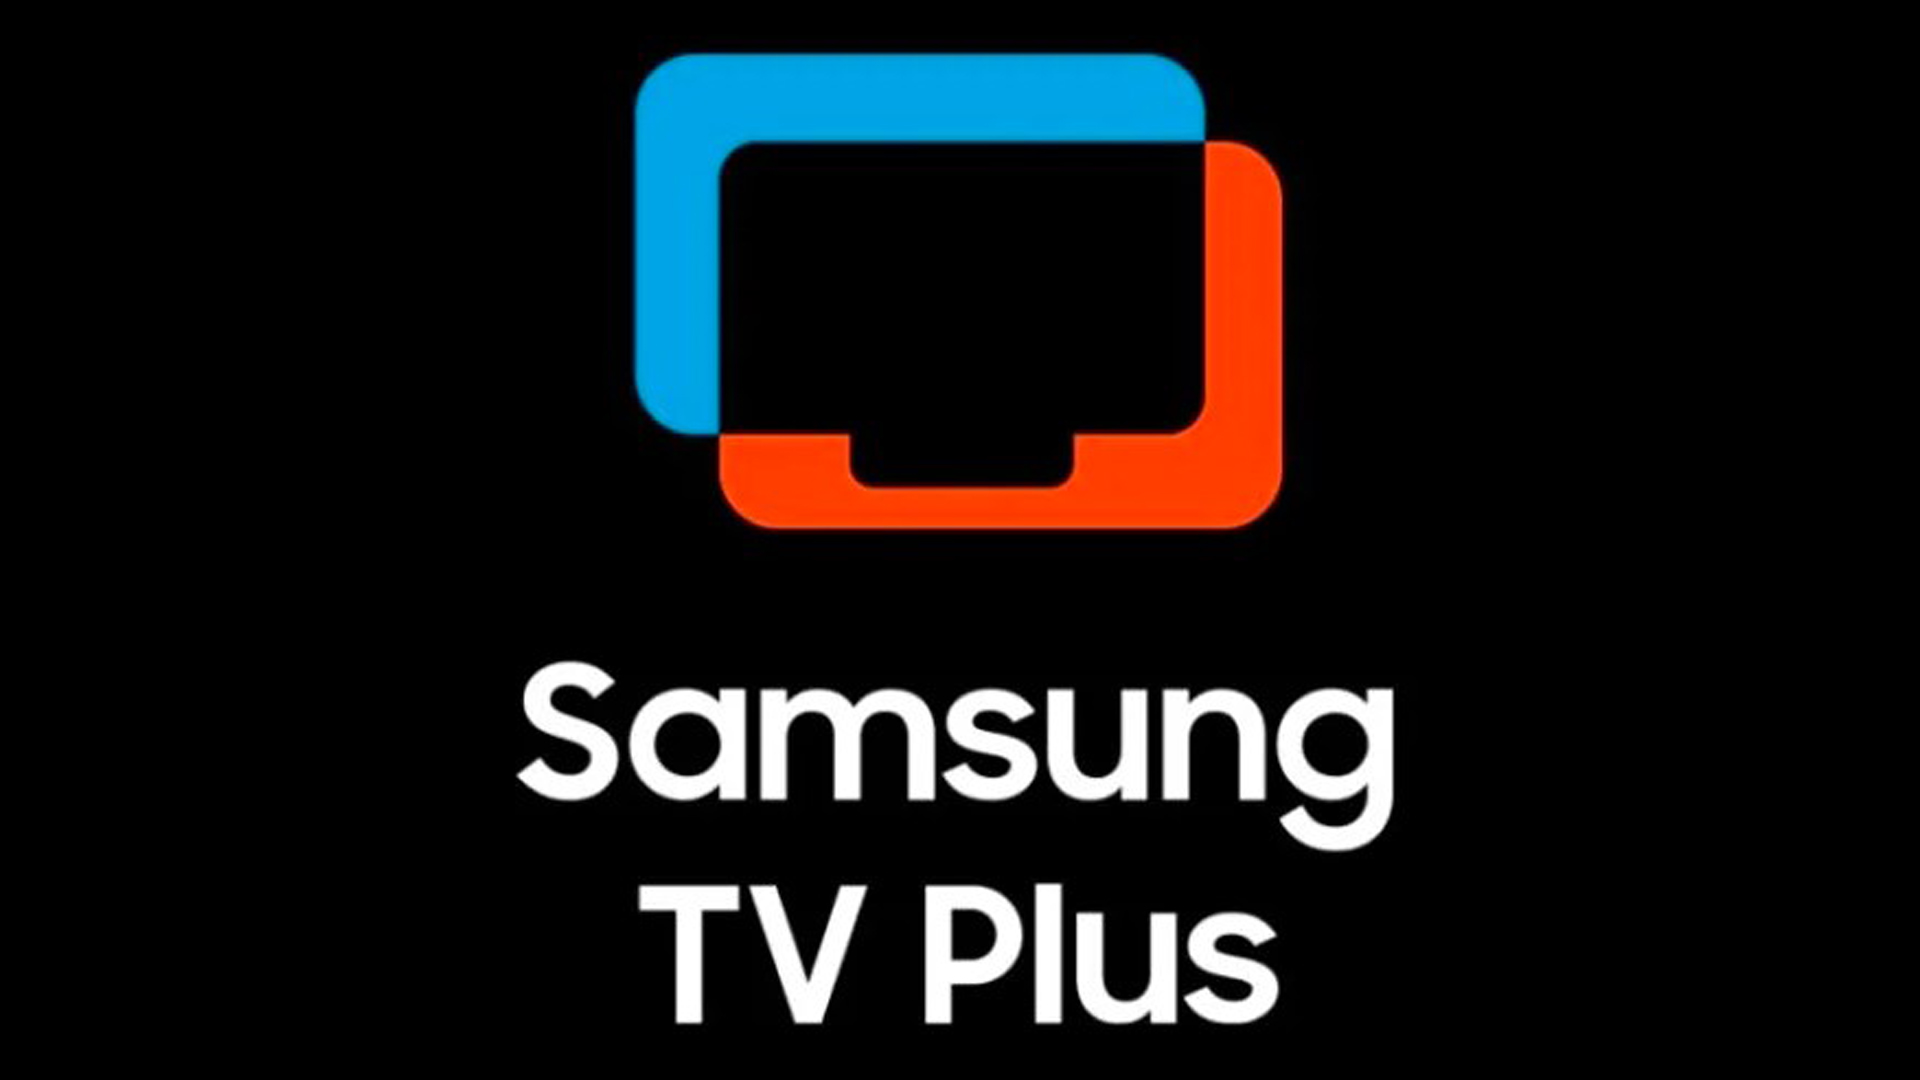 Upgrade your Samsung TV with three free channels for parents – a major brand treat! #SamsungTV #FreeUpgrade #ParentalChannels